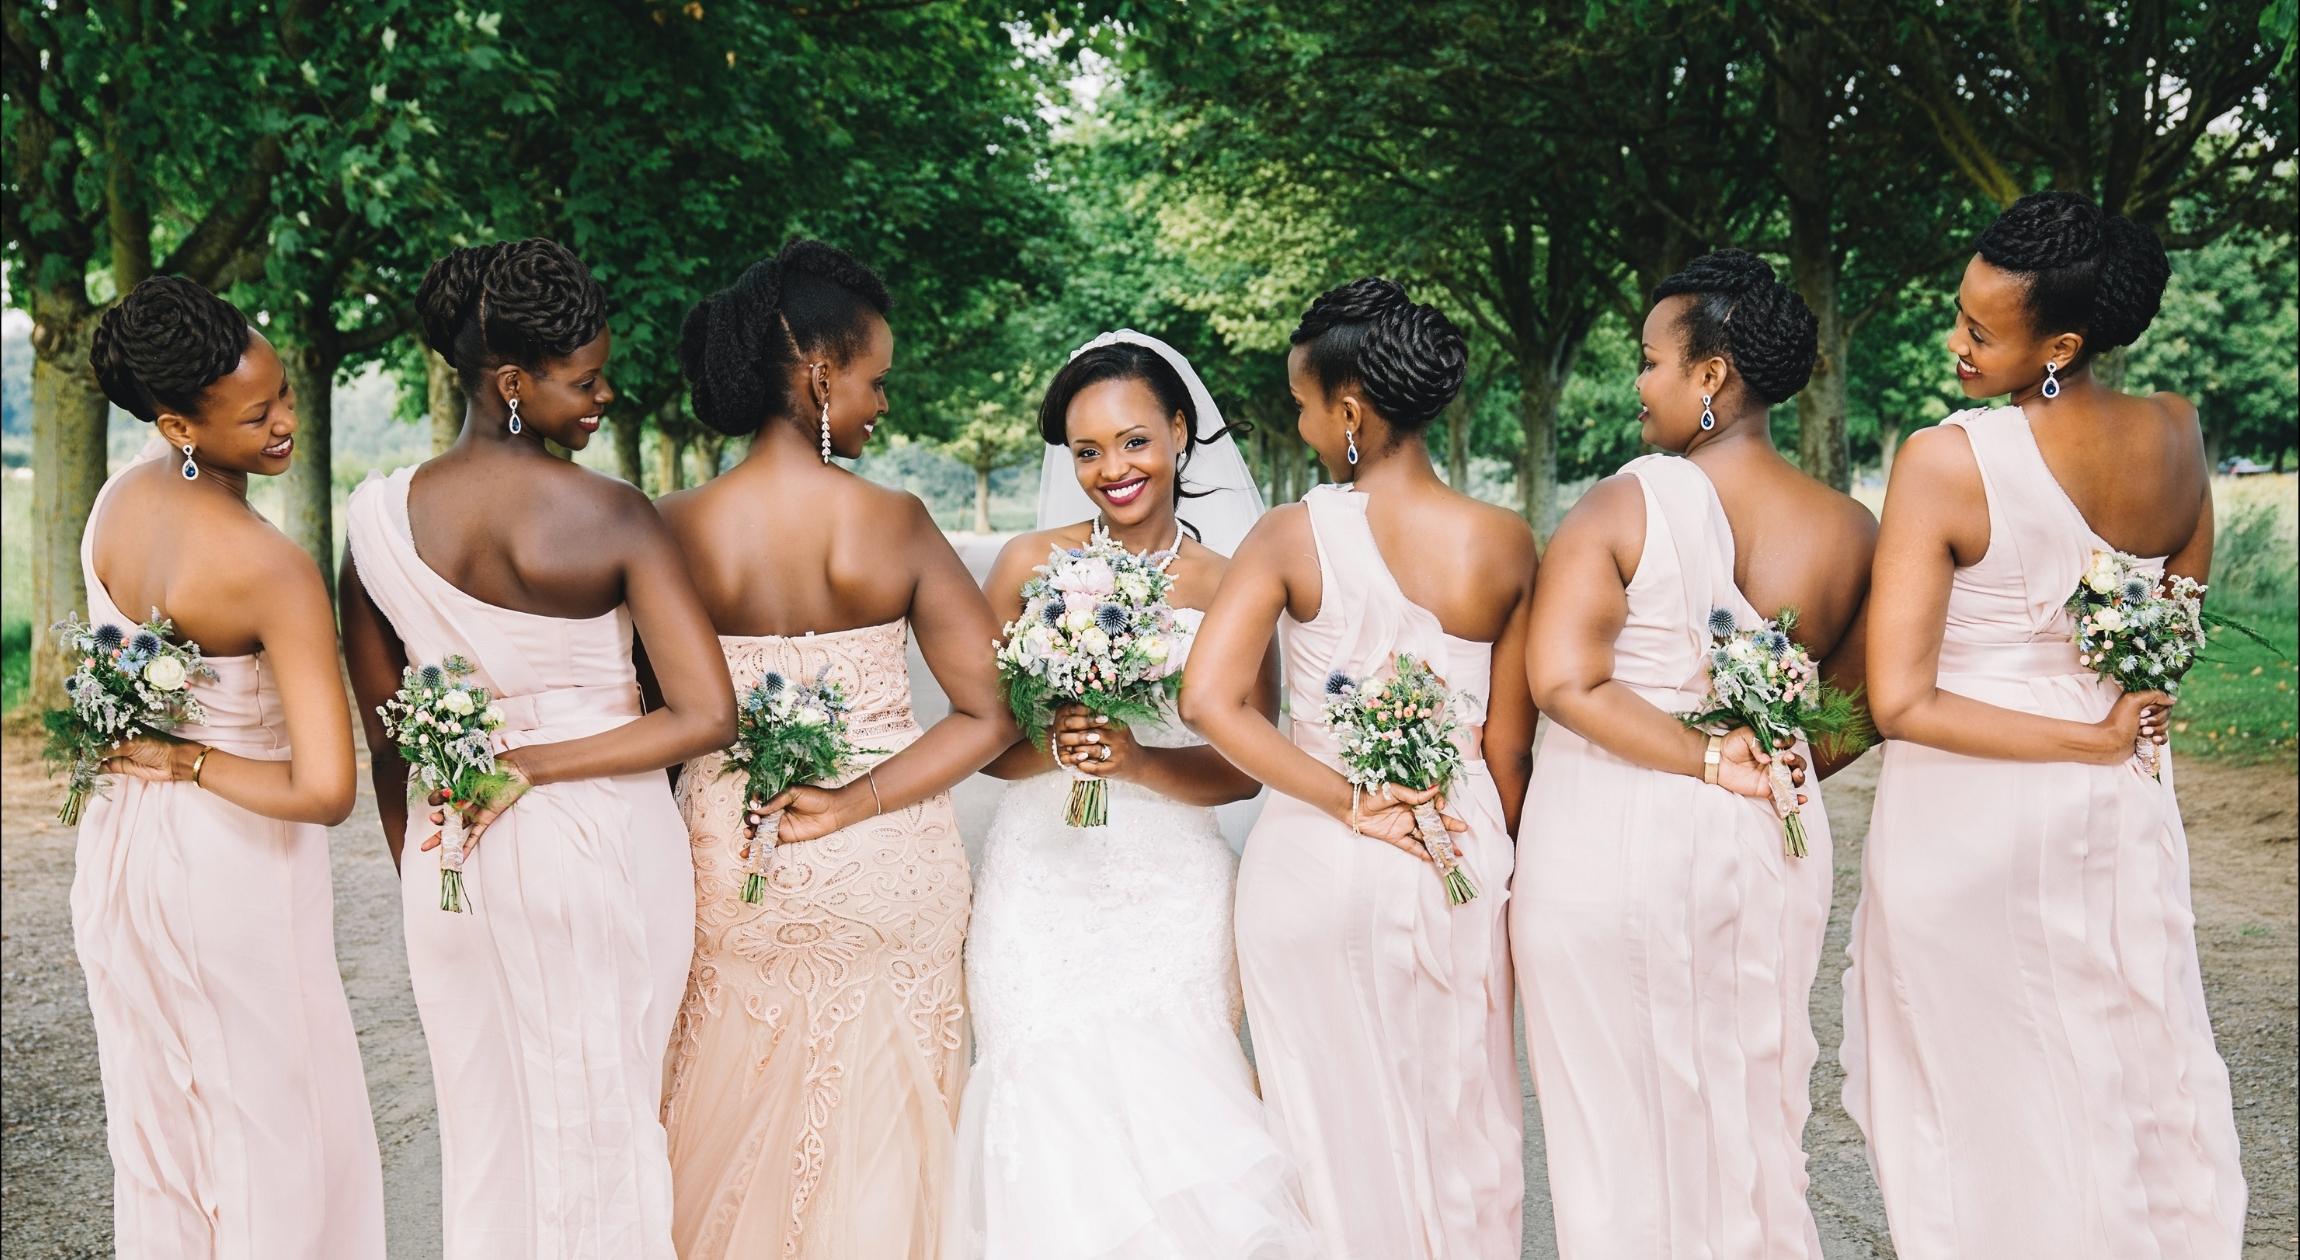 Six Black women in pink dresses stand next to a Black woman in a white dress